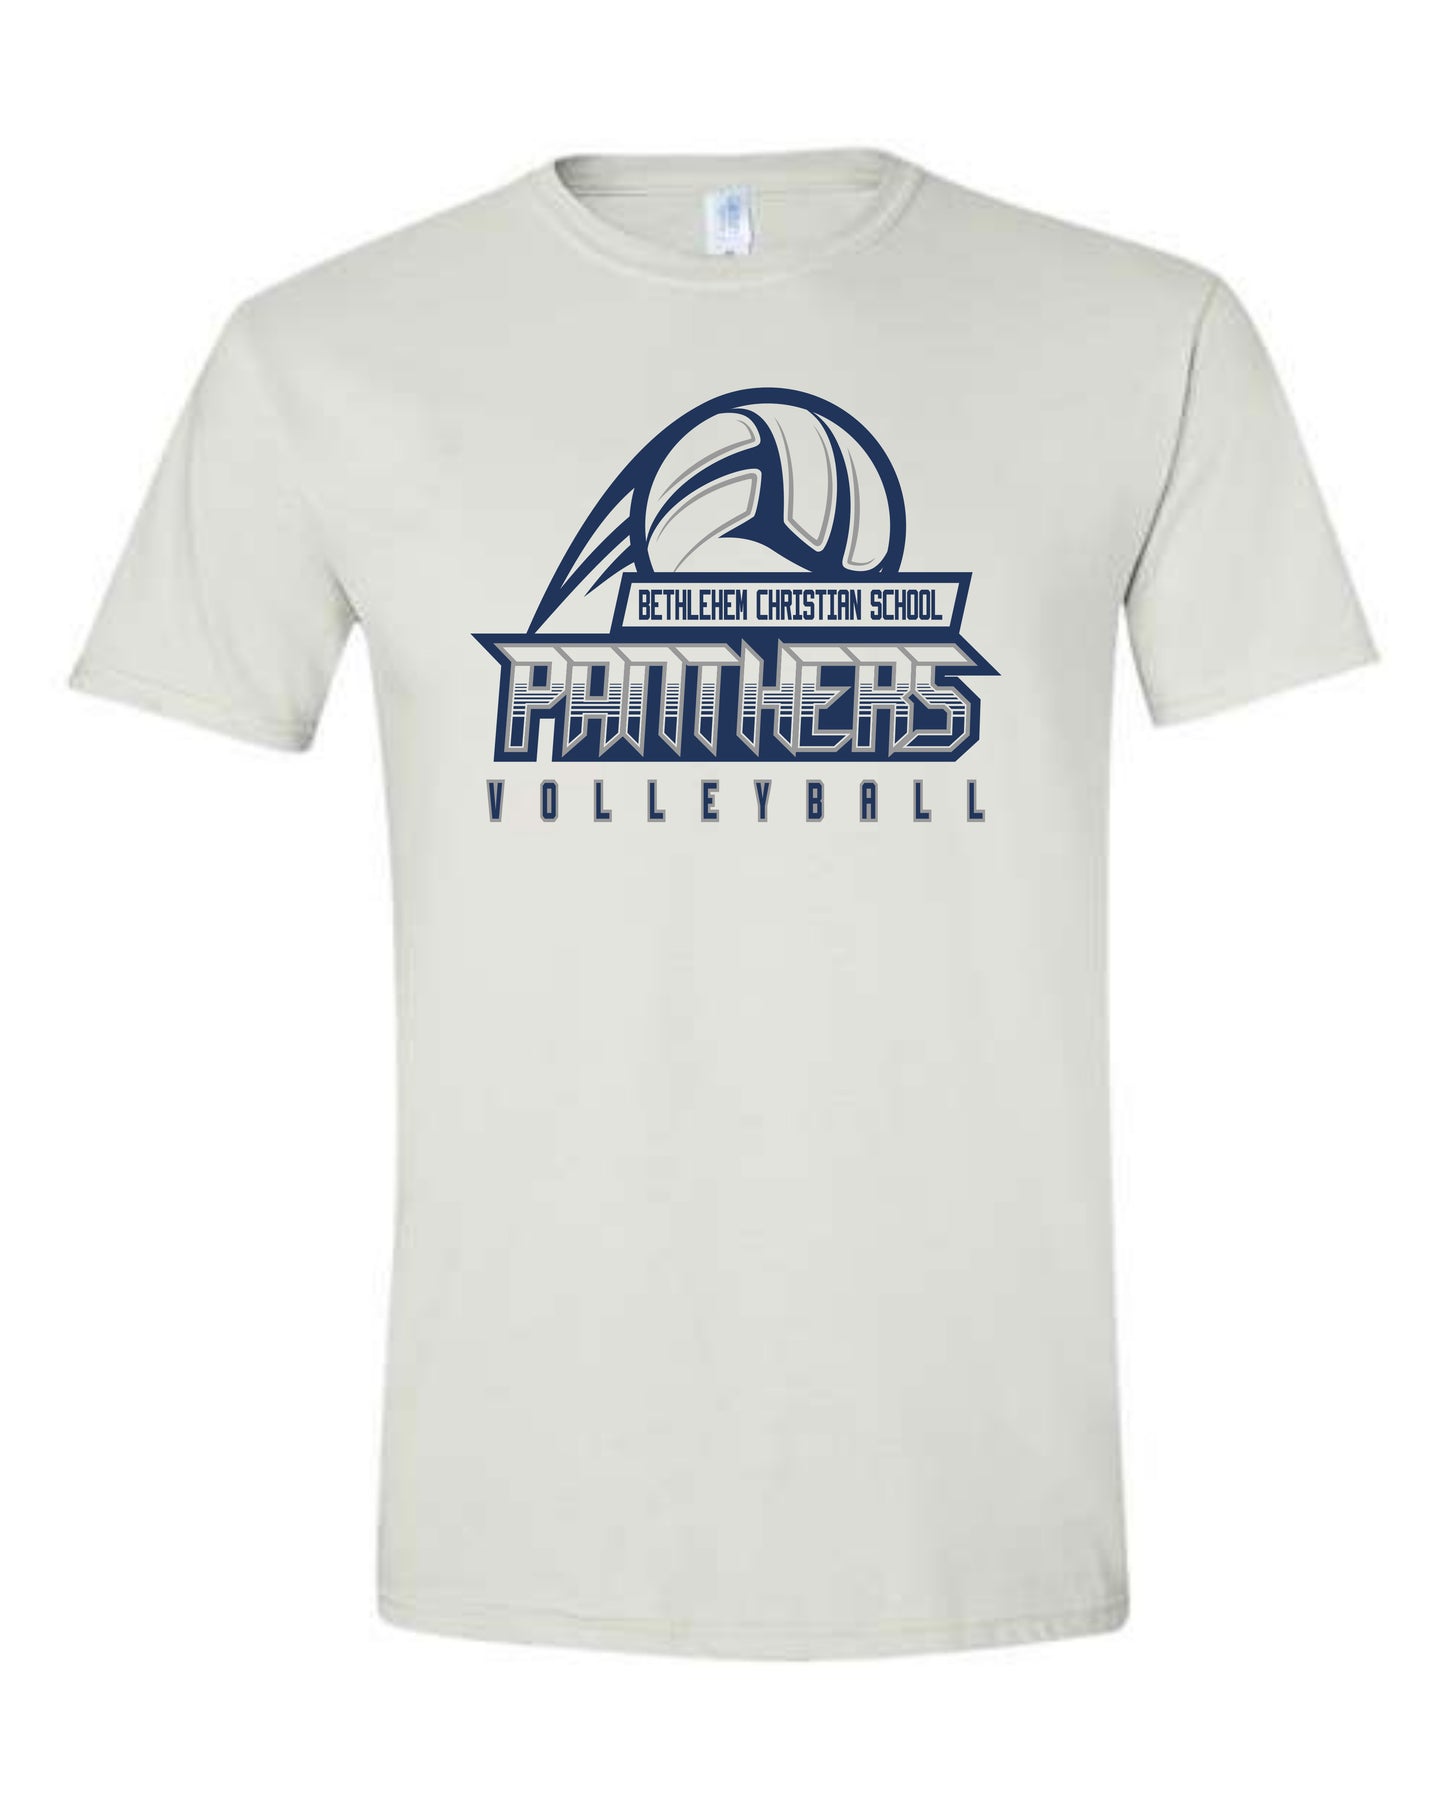 BCS Panthers Volleyball - Adult Tee